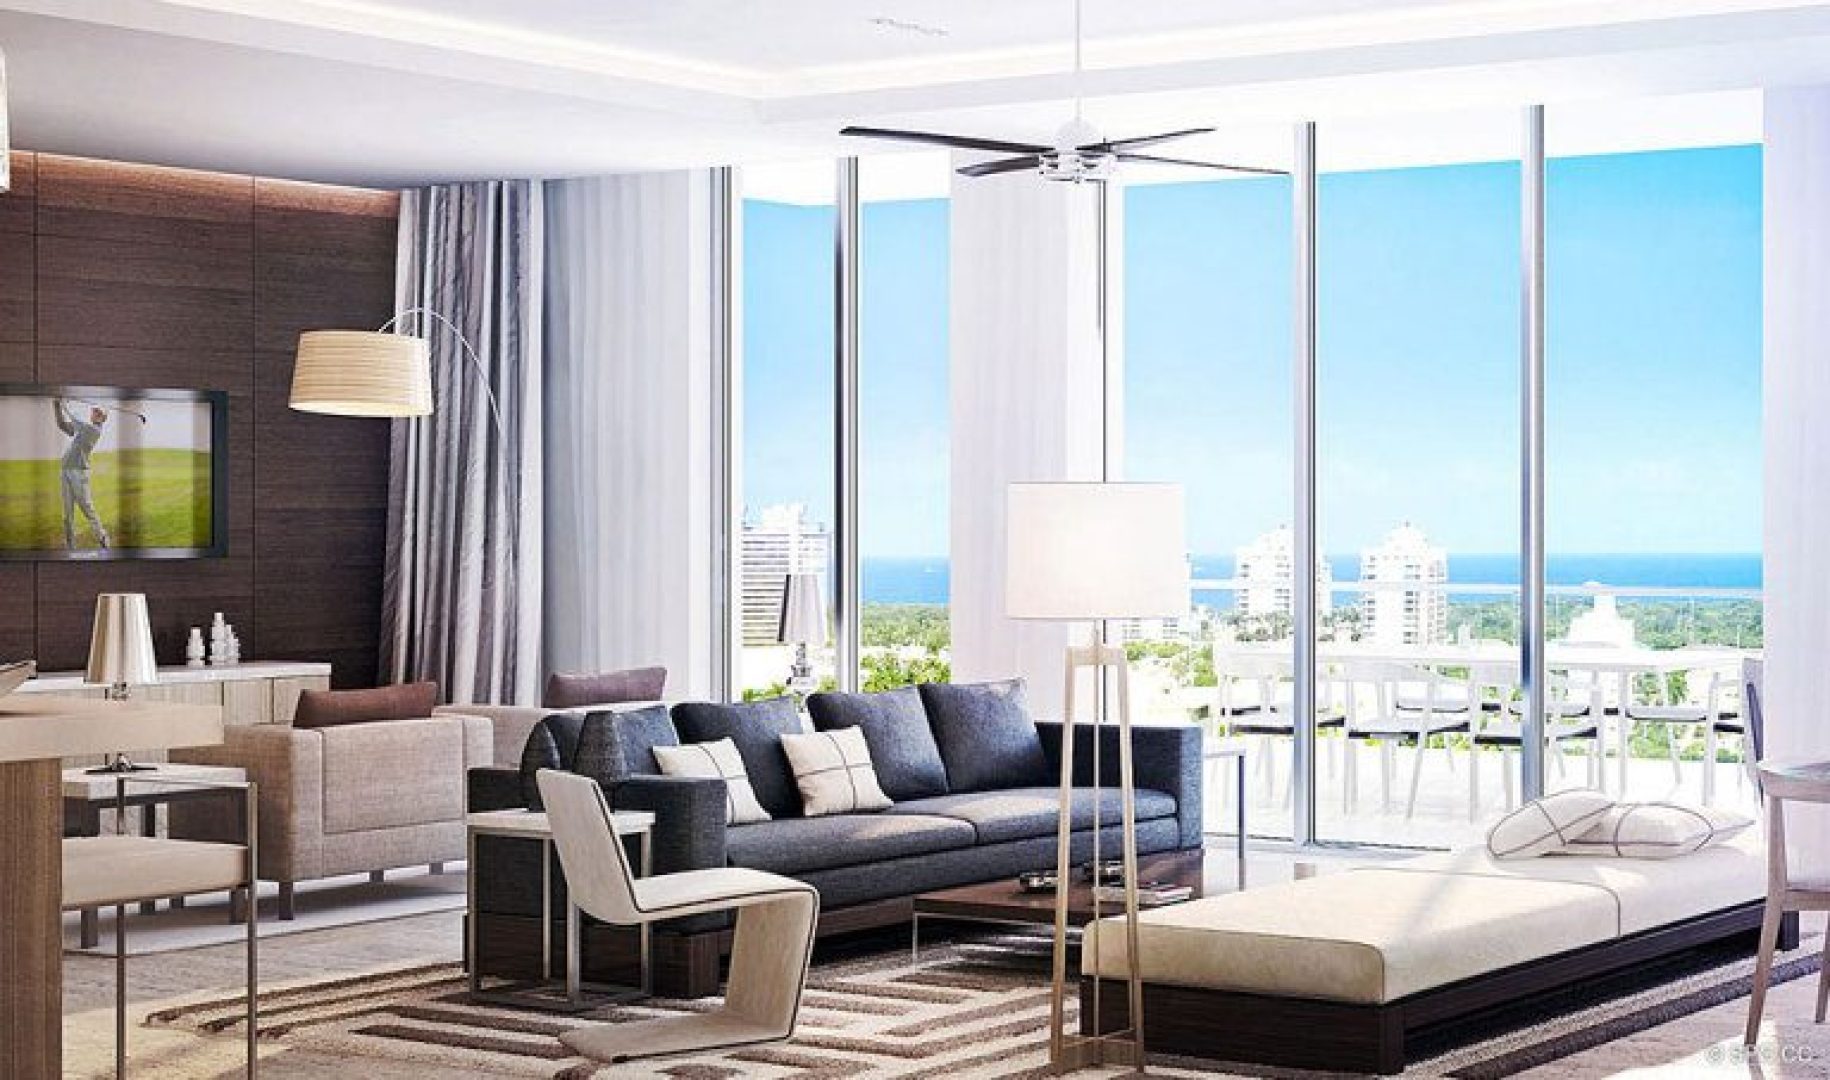 Floor to Ceiling Glass at Riva, Luxury Waterfront Condos in Fort Lauderdale, Florida 33304.